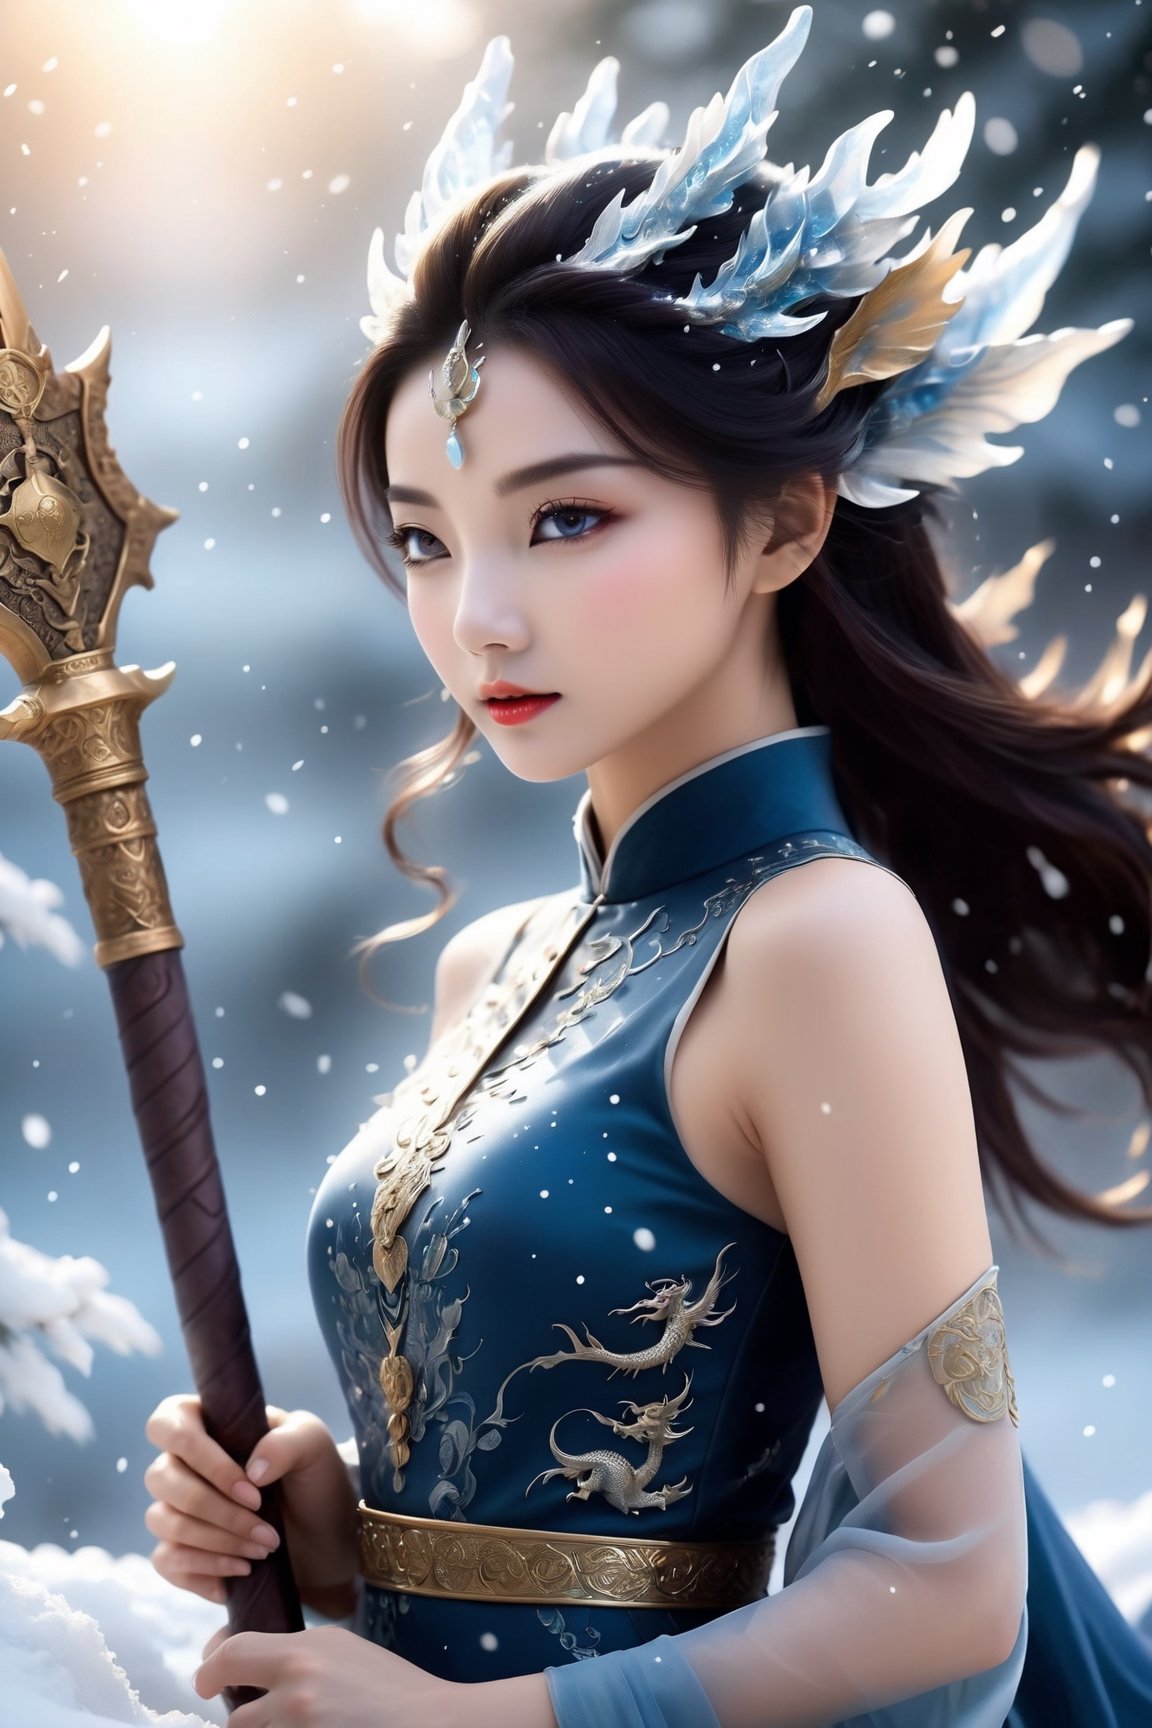 (full body shot):1.2, viewed from bottom, masterpiece, high quality, photorealistic:1.13, raw photo, (bright eyes):1.02, (symmetric face):1.05, a breathtakingly beautiful dragon queen carrying a war hammer, (war hammer):1.4, wearing tight navy chinese cheongsam covered with dragon skin, ethereal glamorous caucasian face, ((pronounced facial features):1.15, exquisite crown with delicated decorations, Dragon, winter, snow falling